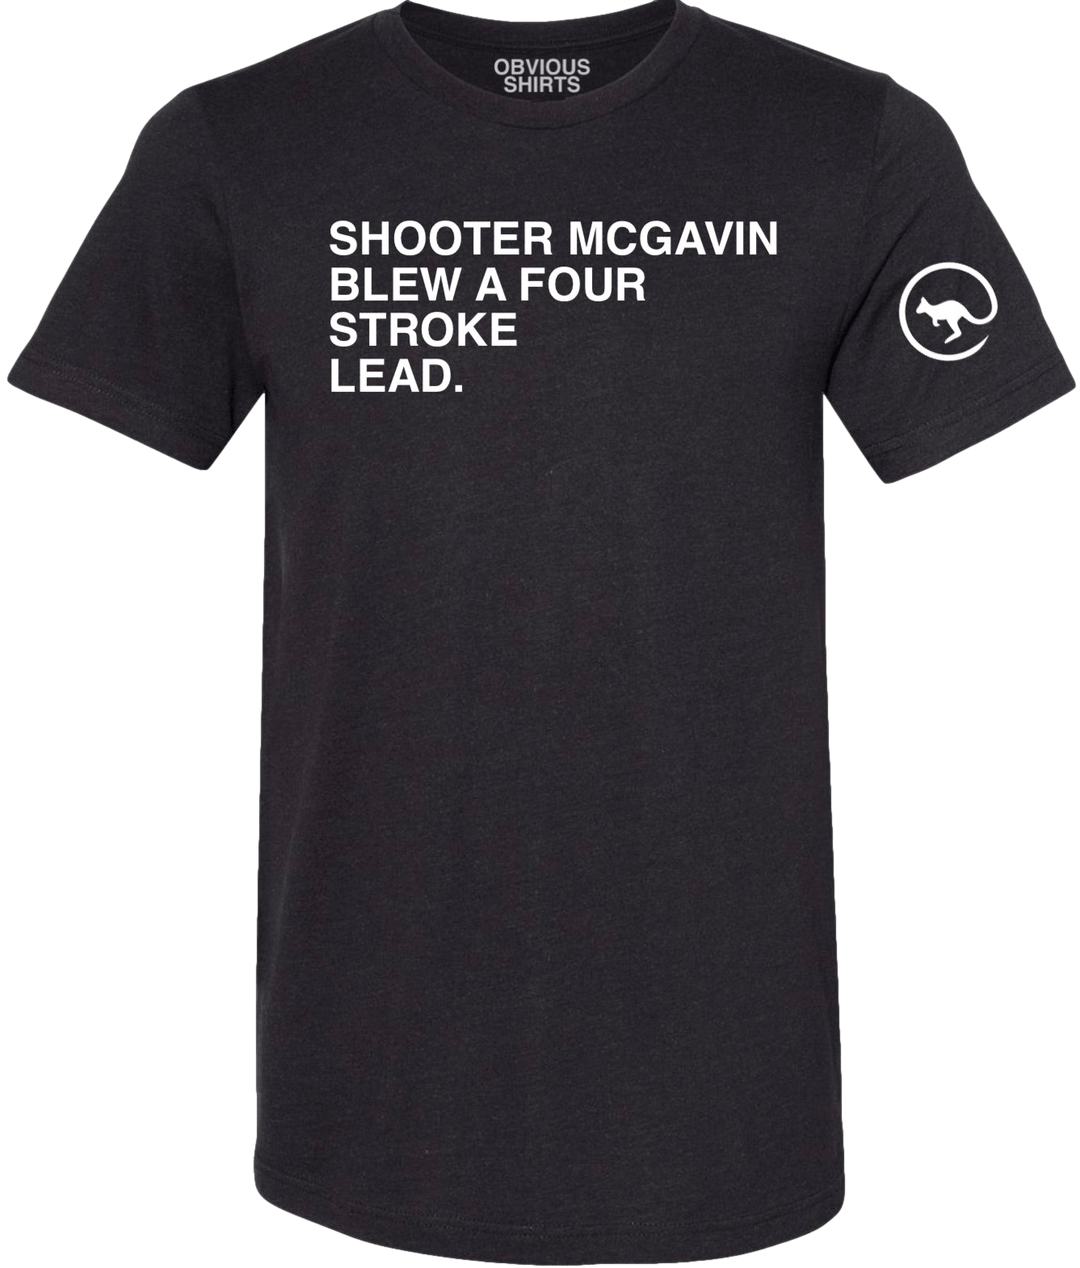 SHOOTER BLEW A FOUR STROKE LEAD (BLACK) - OBVIOUS SHIRTS